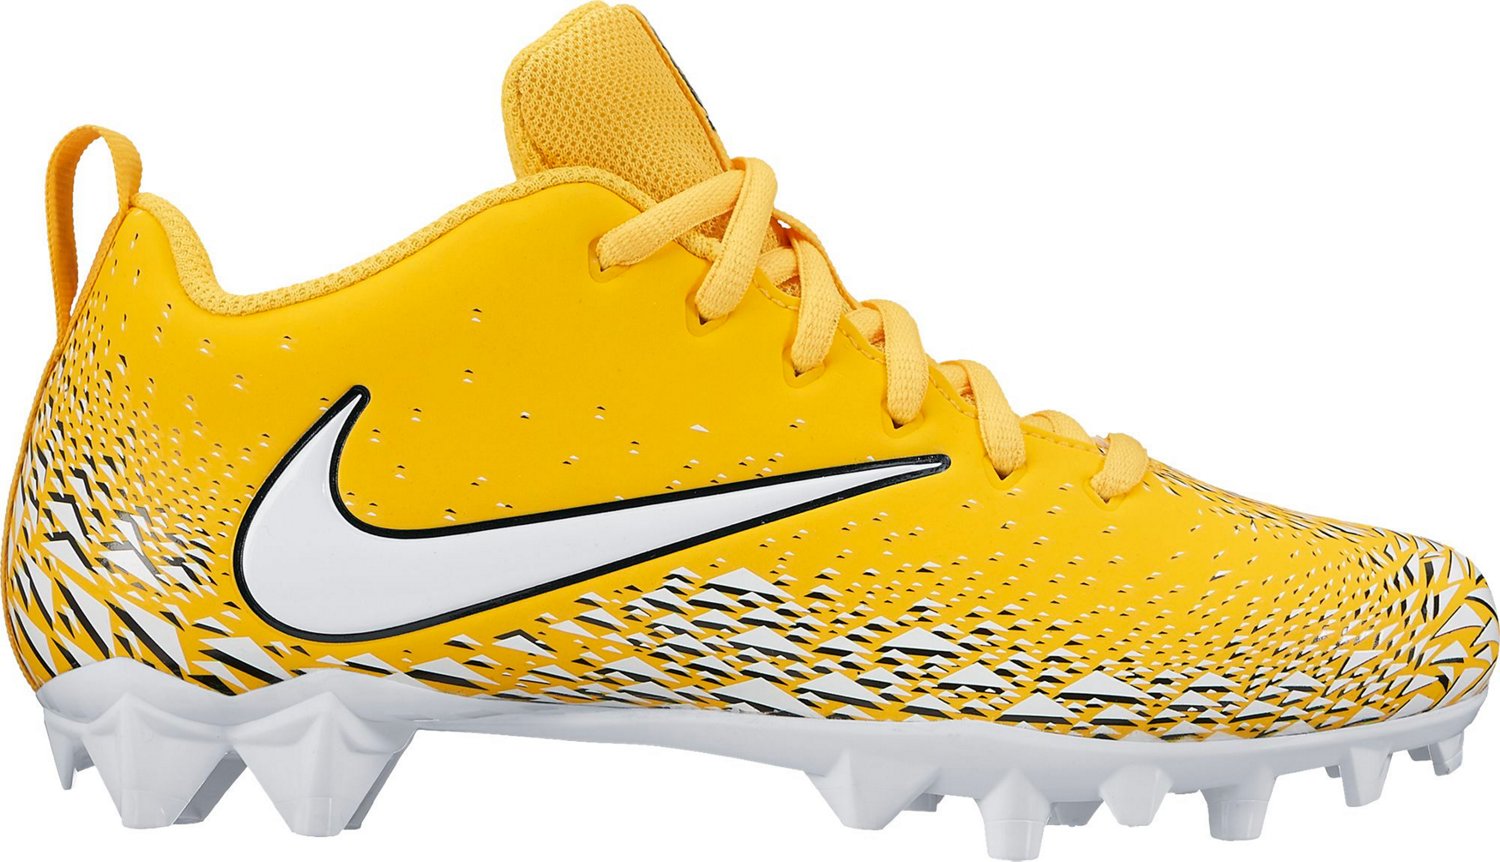 blue and yellow youth football cleats